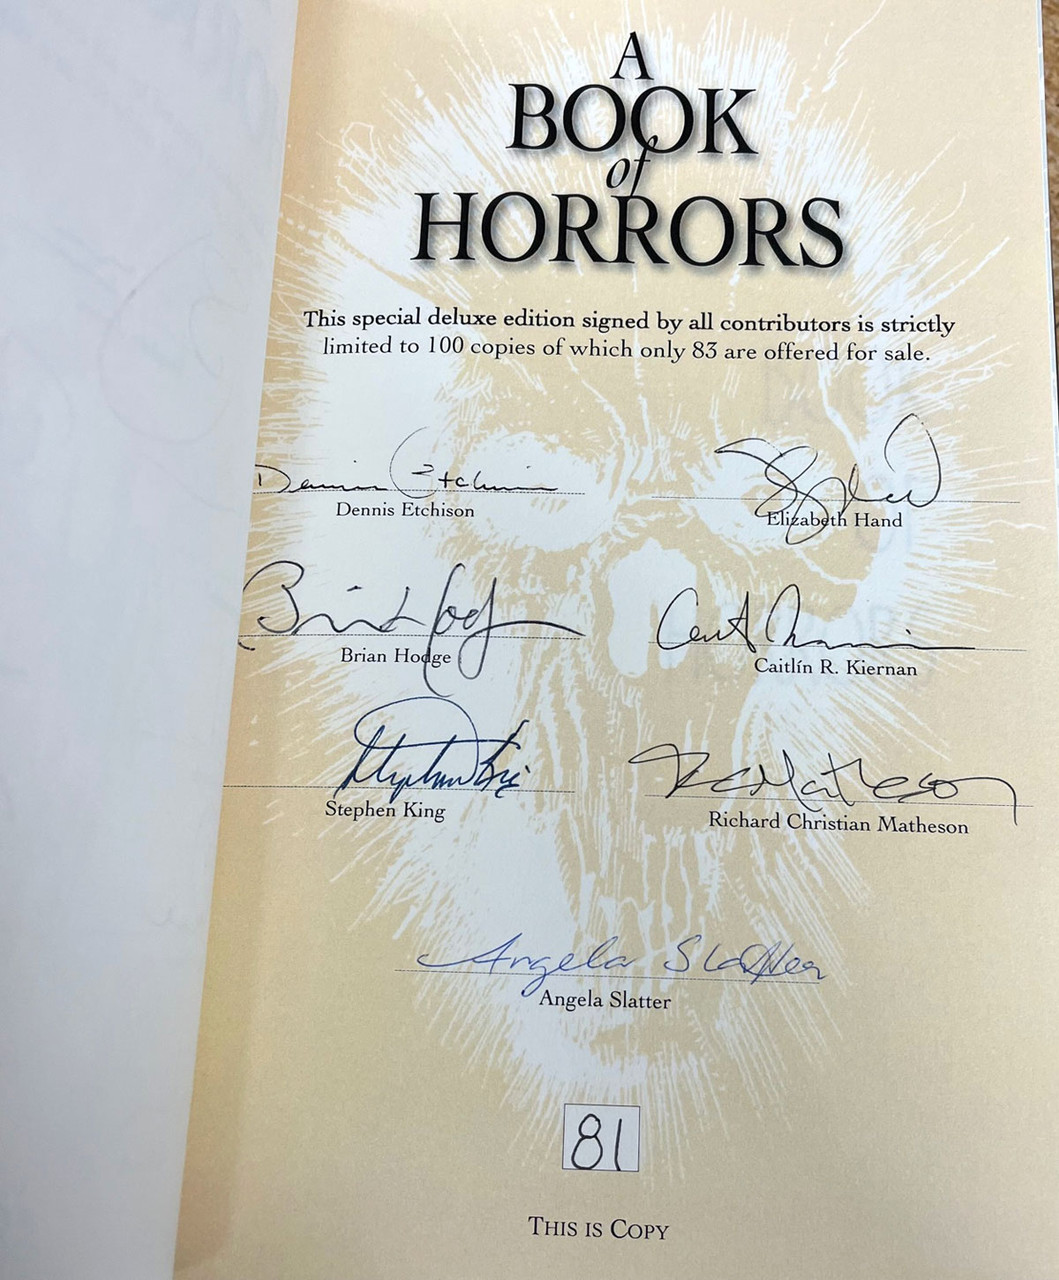 Cemetery Dance 2012 "A BOOK OF HORRORS" Signed Limited Deluxe Edition, Leather Bound, No. 81 of only 83 [Very Fine]